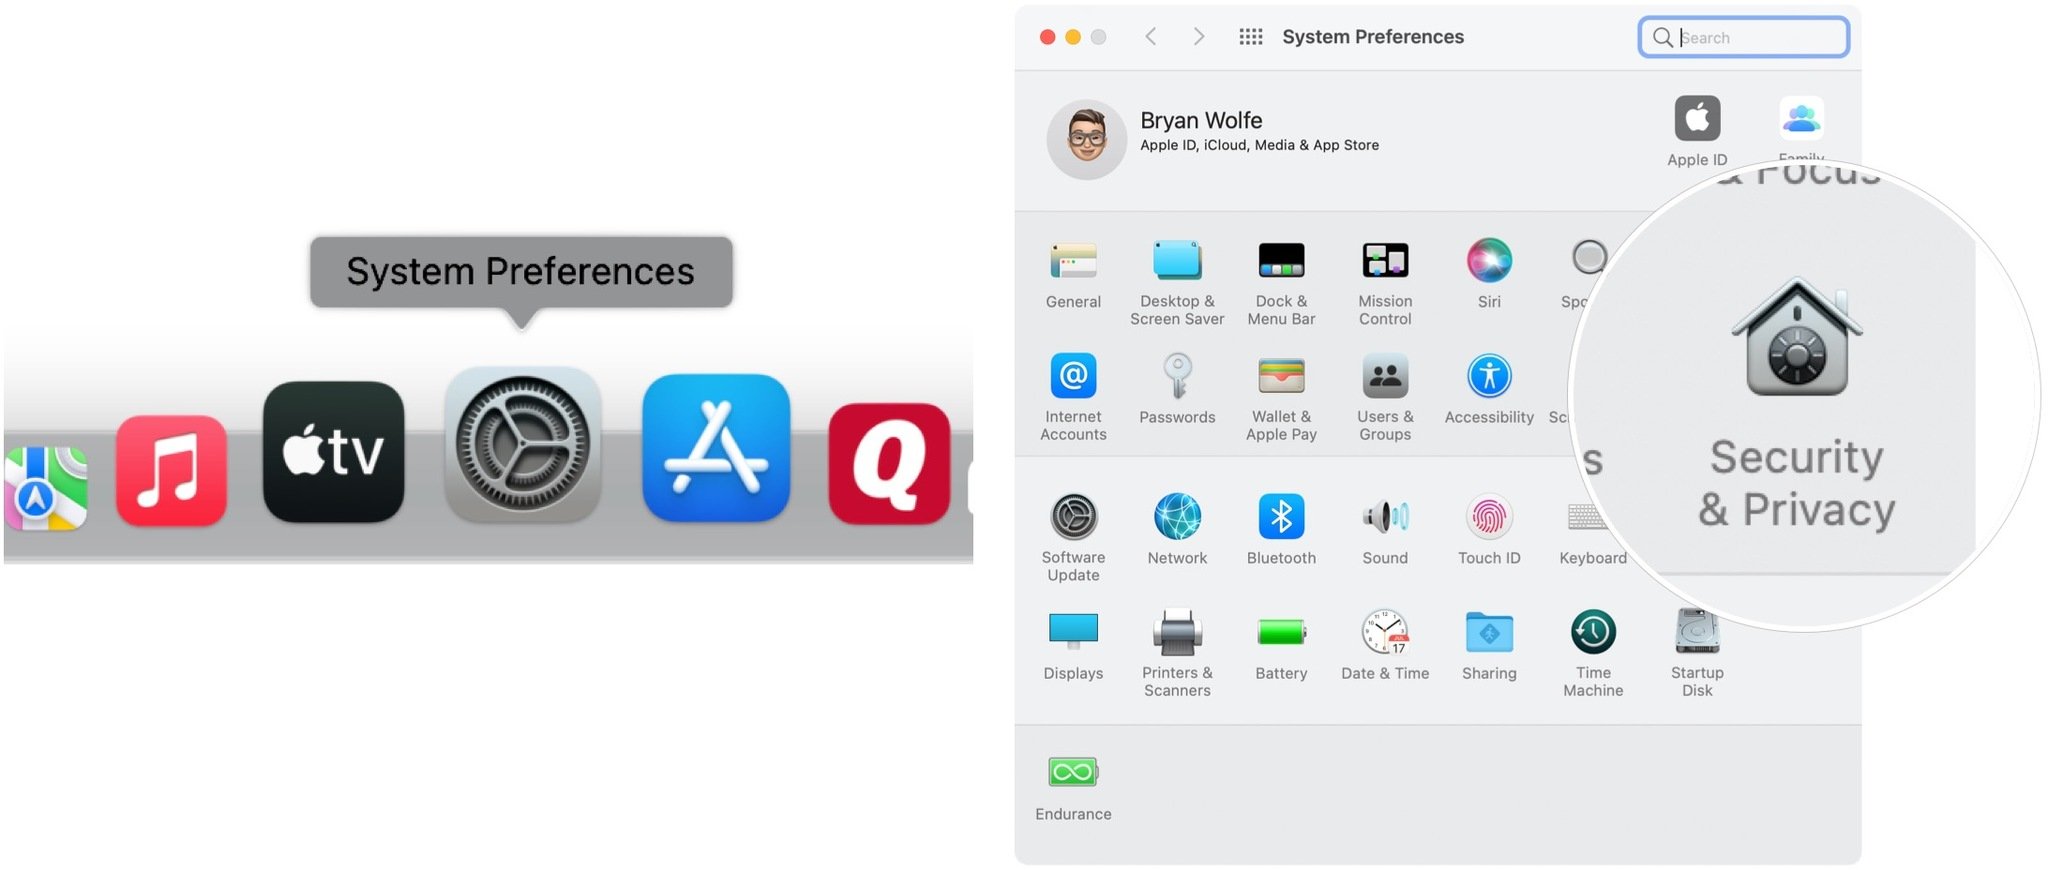 To allow non-App Store apps to run on macOS, go into System Preferences, then choose Security & Privacy.